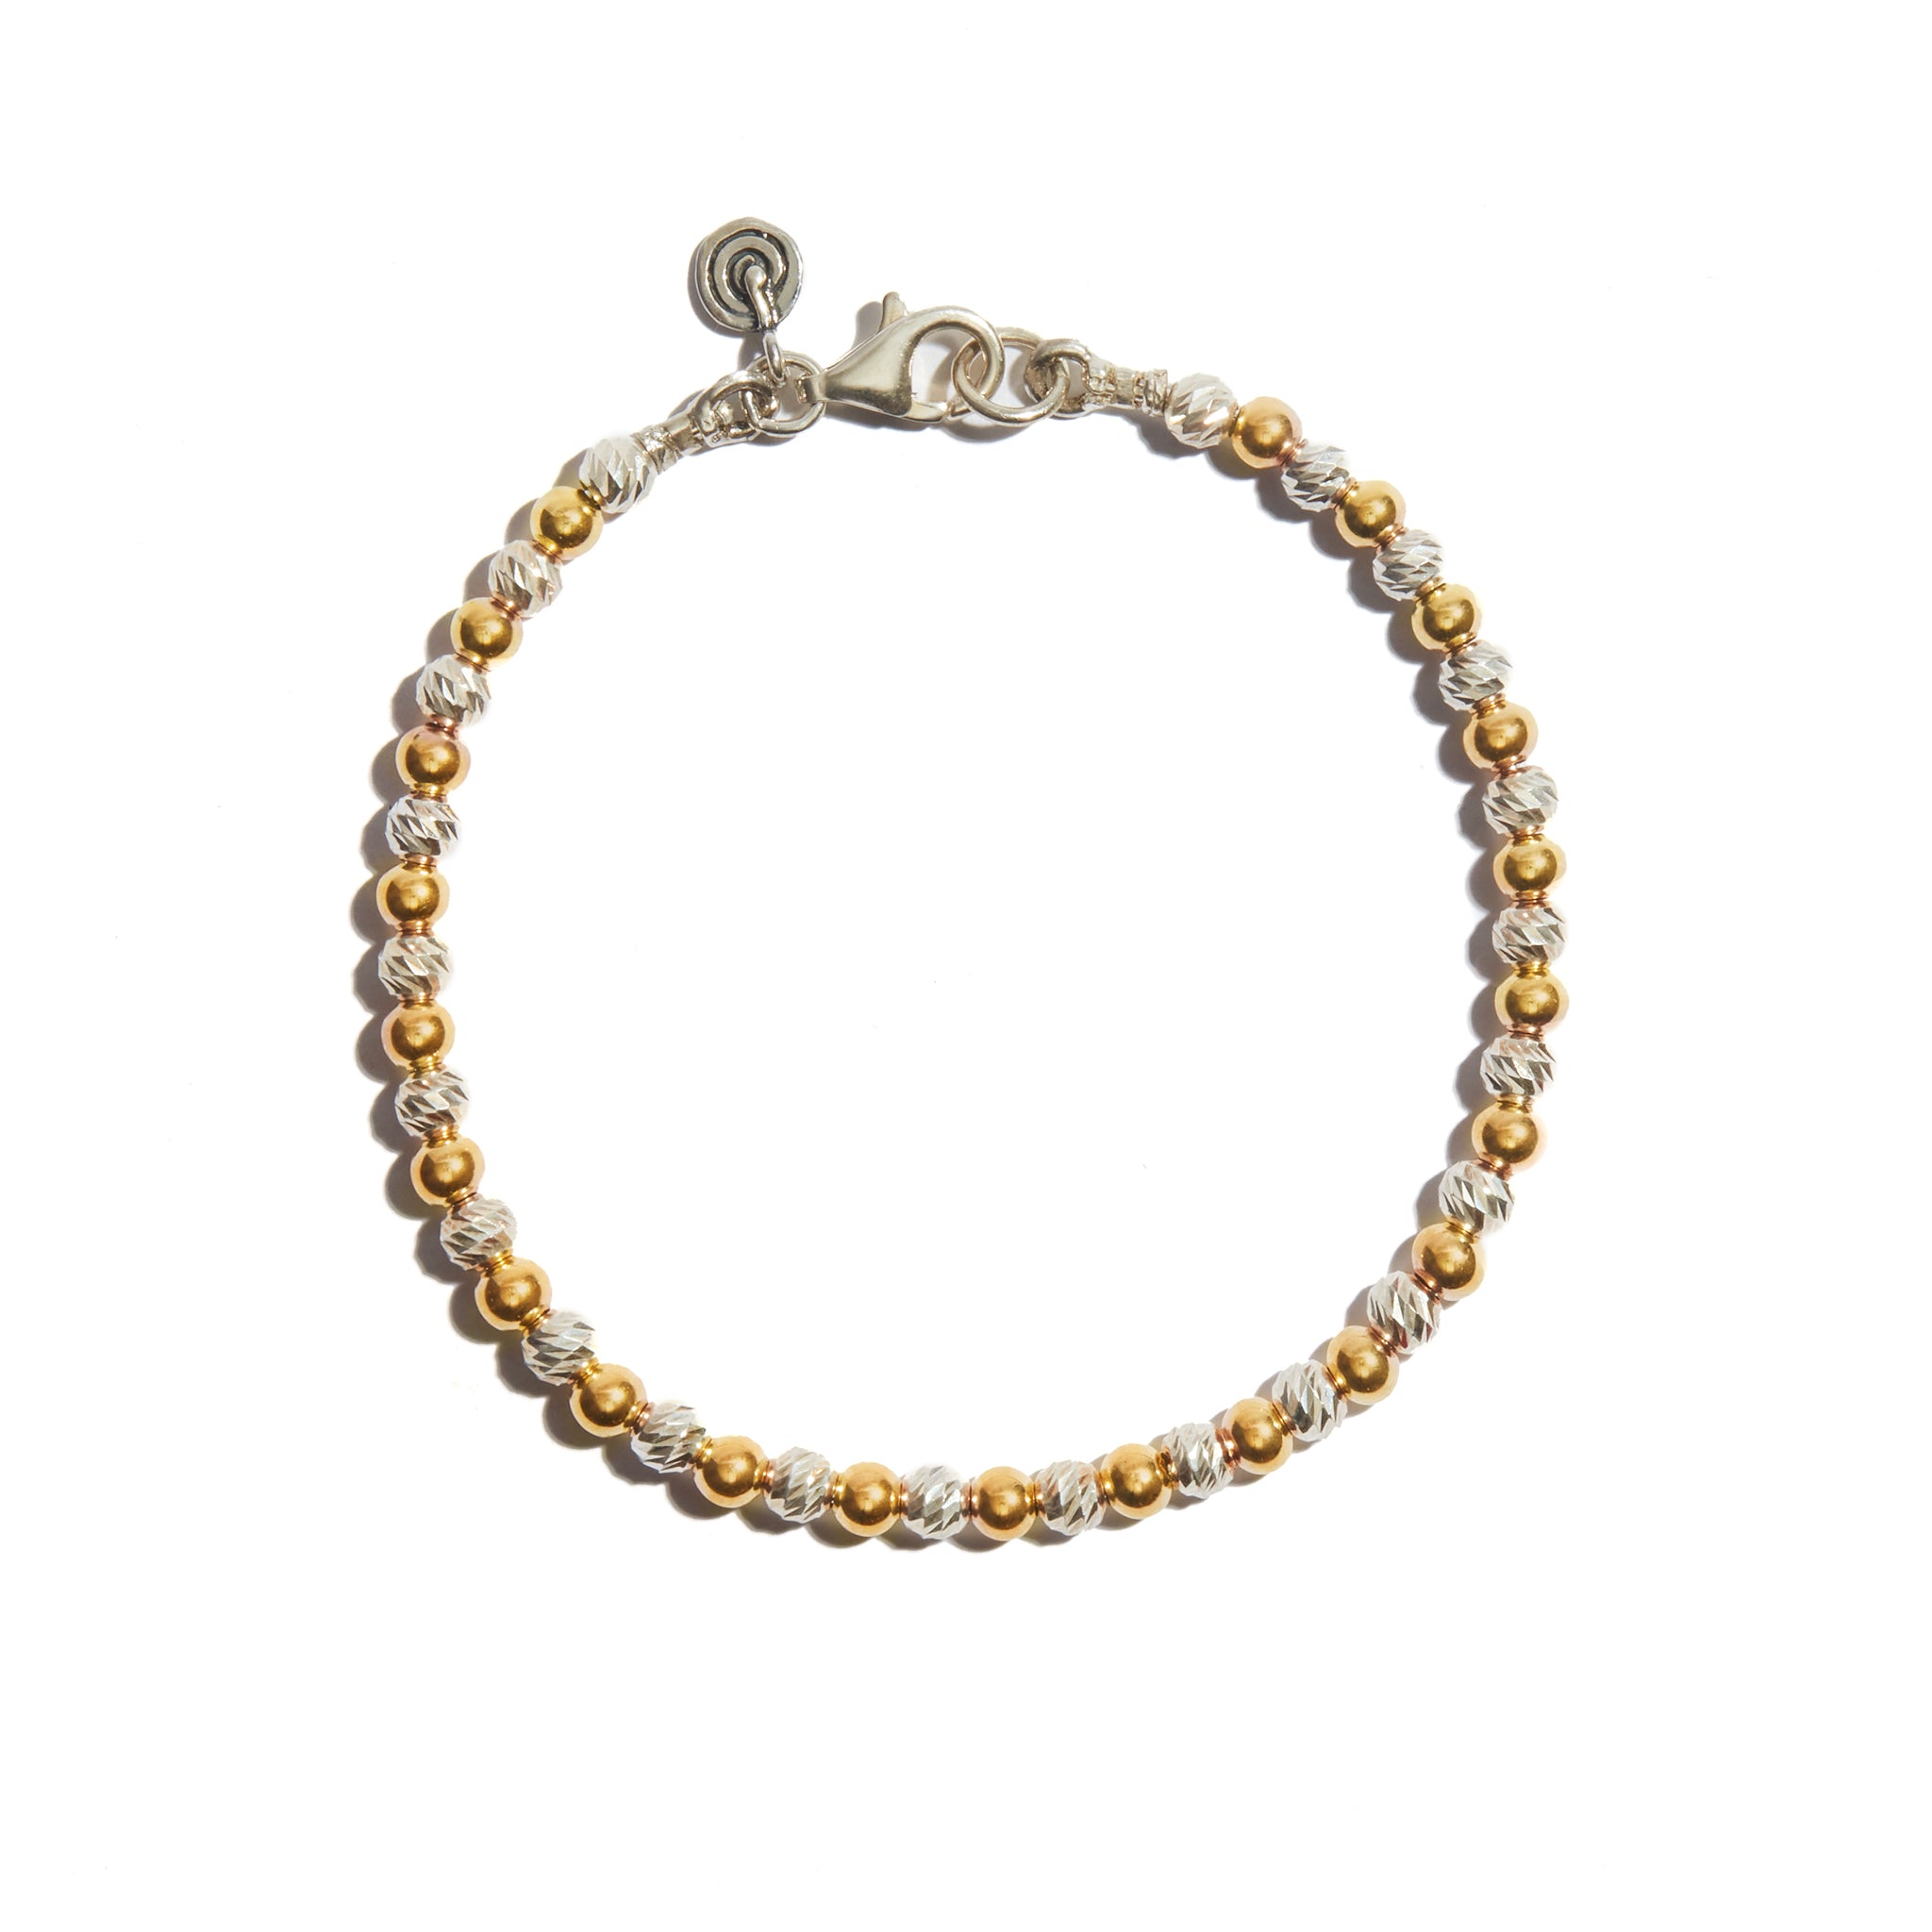 A stunning two-tone sparkle bracelet alternating beads made of 14ct gold fill and sterling silver, adding sparkle and elegance to your wrist.